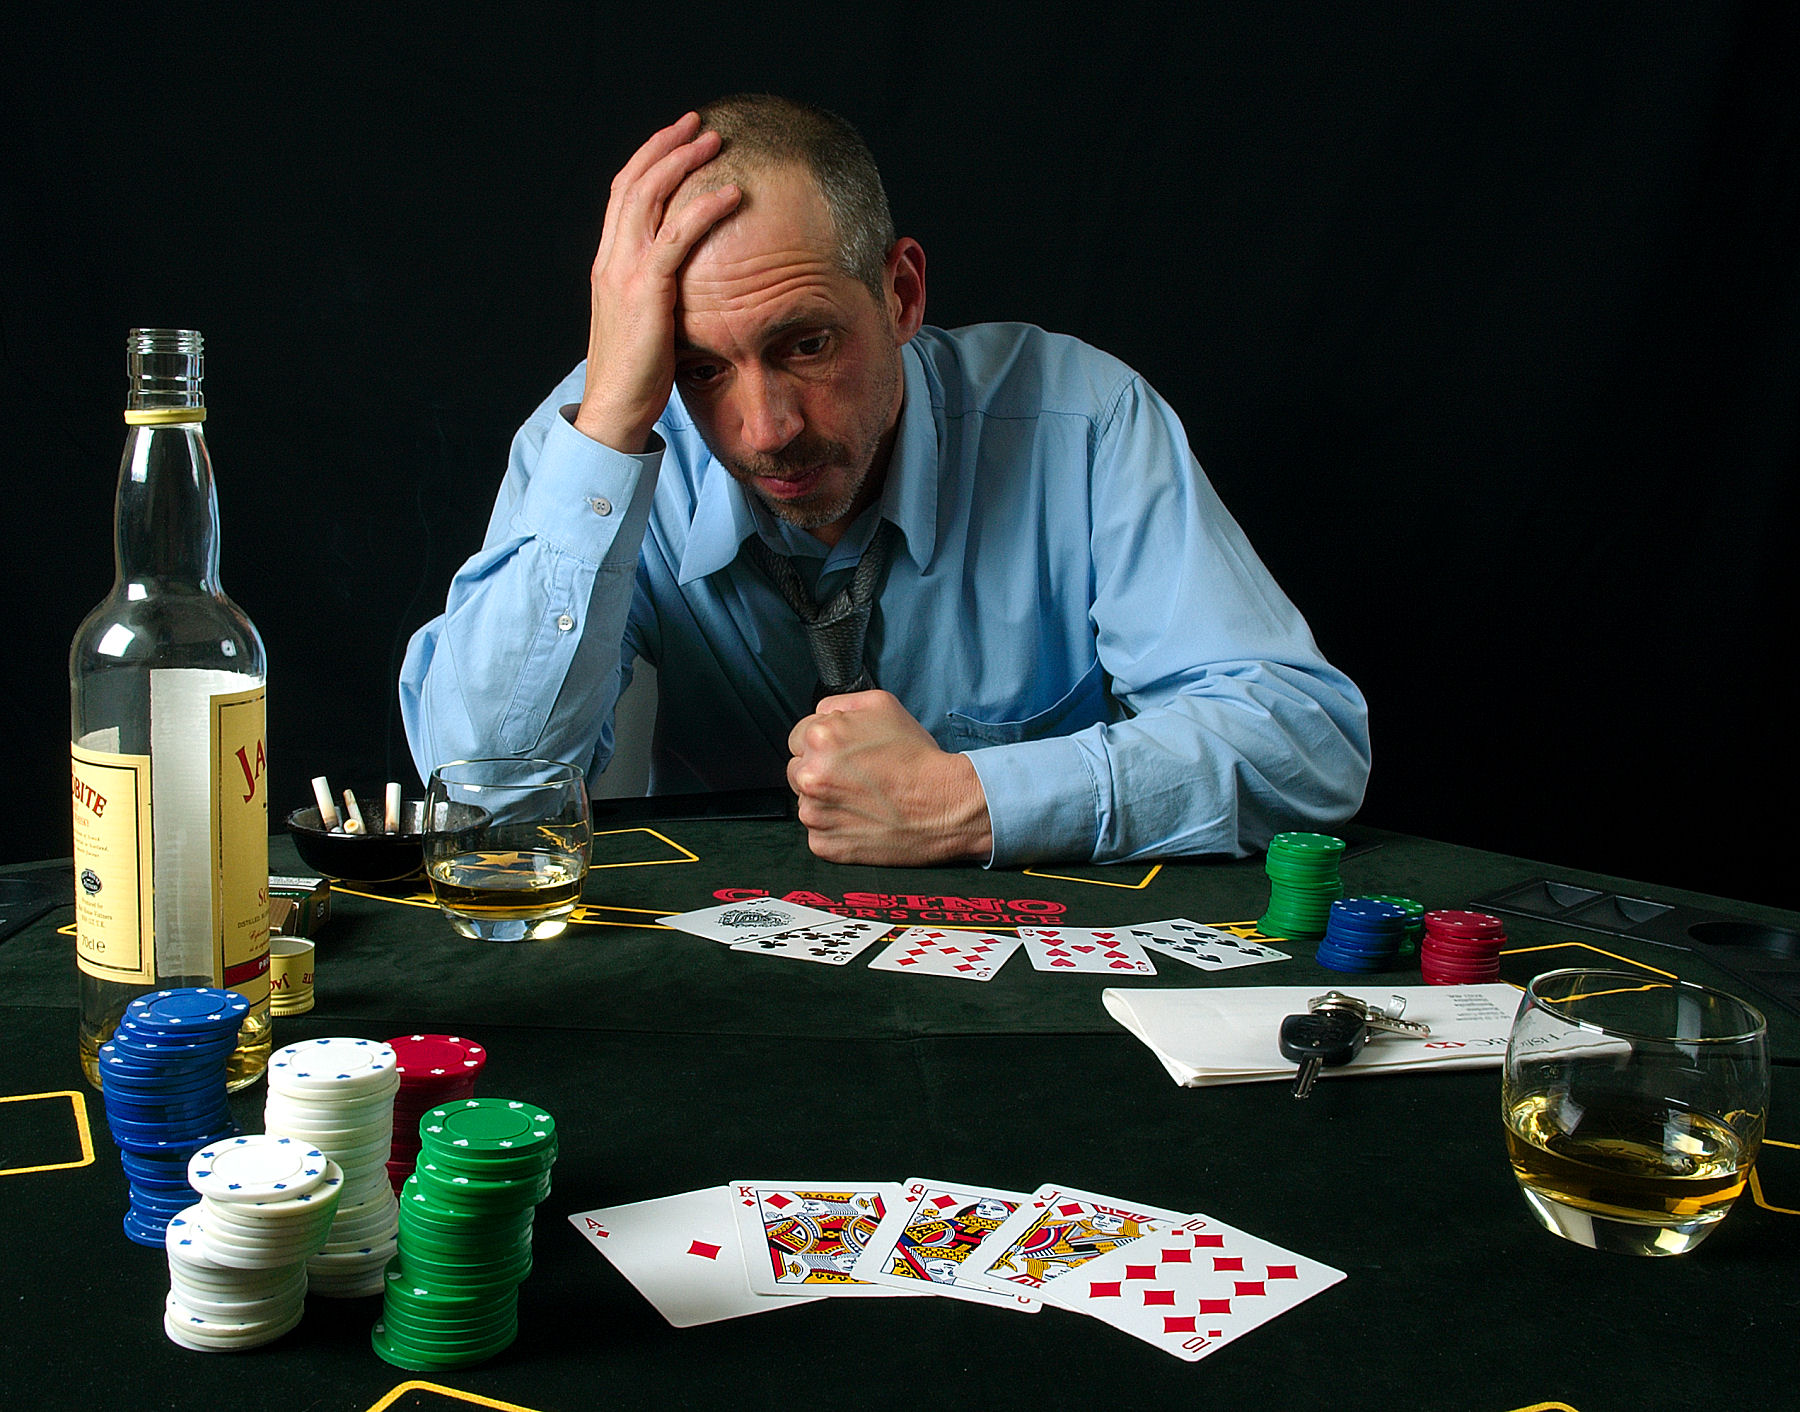 Gambling addiction support group